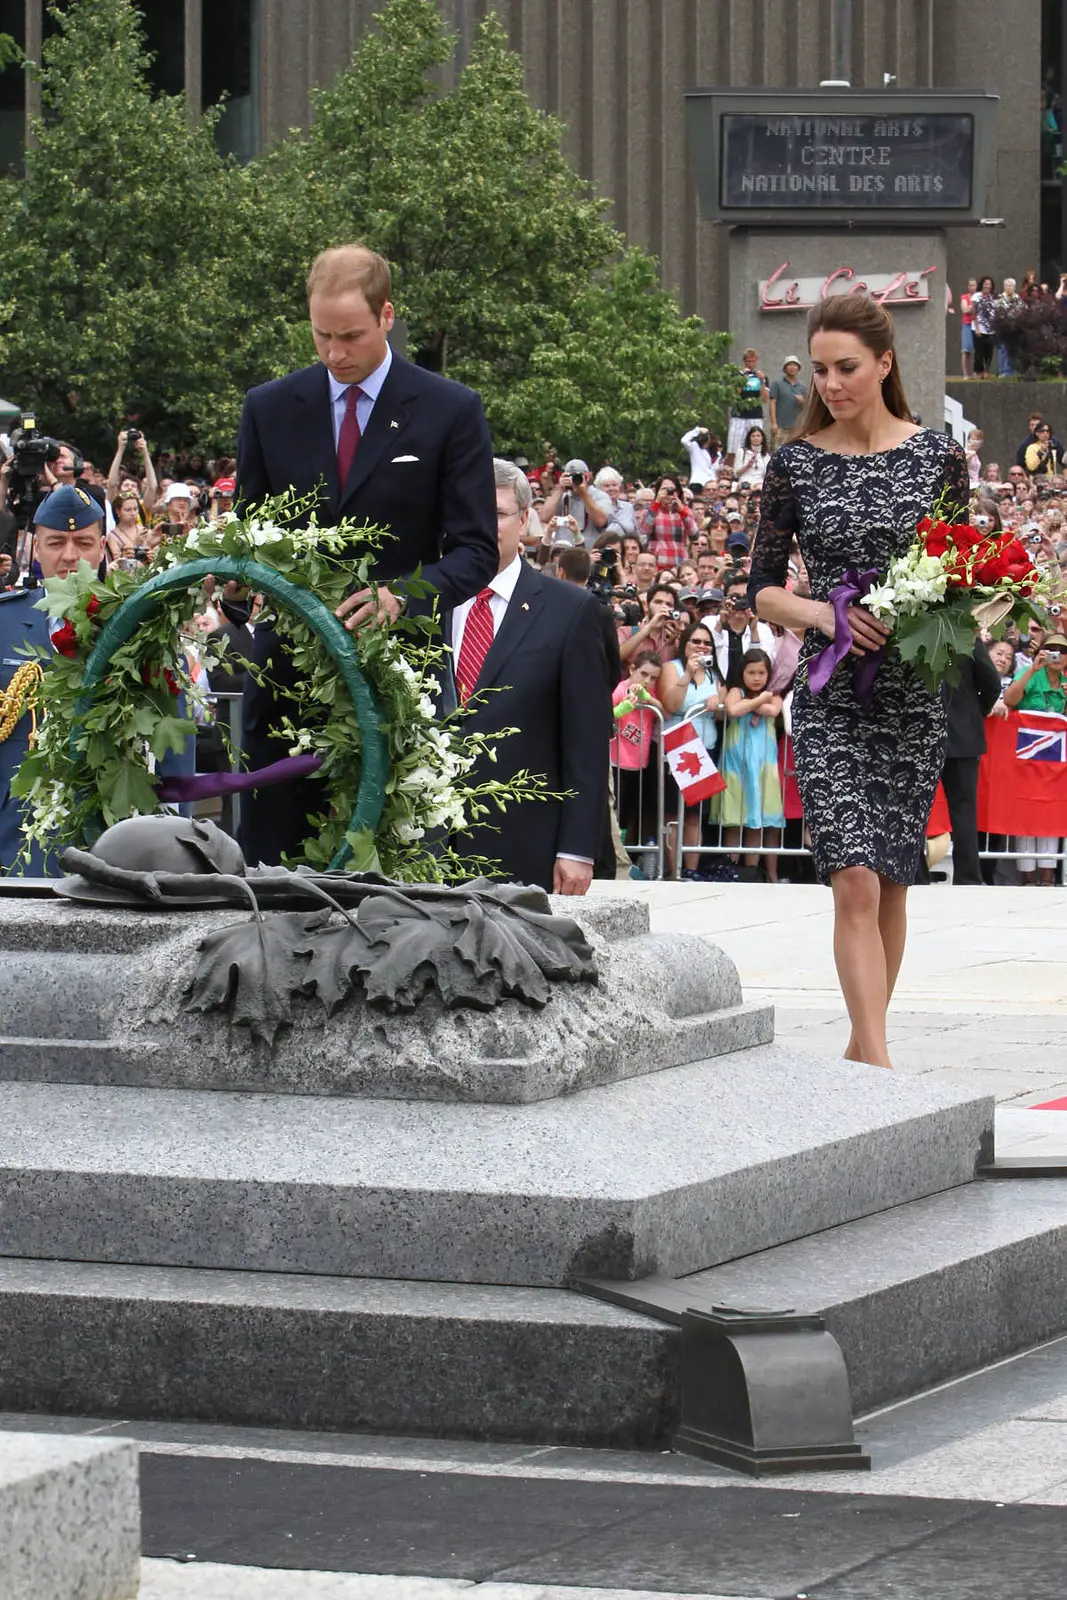 The Duke and DThe Duke and Duchess of cambridge laid wreath at Canadian war memoria during the royal tour of canada in 2011uchess of cambridge laid wreath at Canadian war memoria during the royal tour of canada in 2011